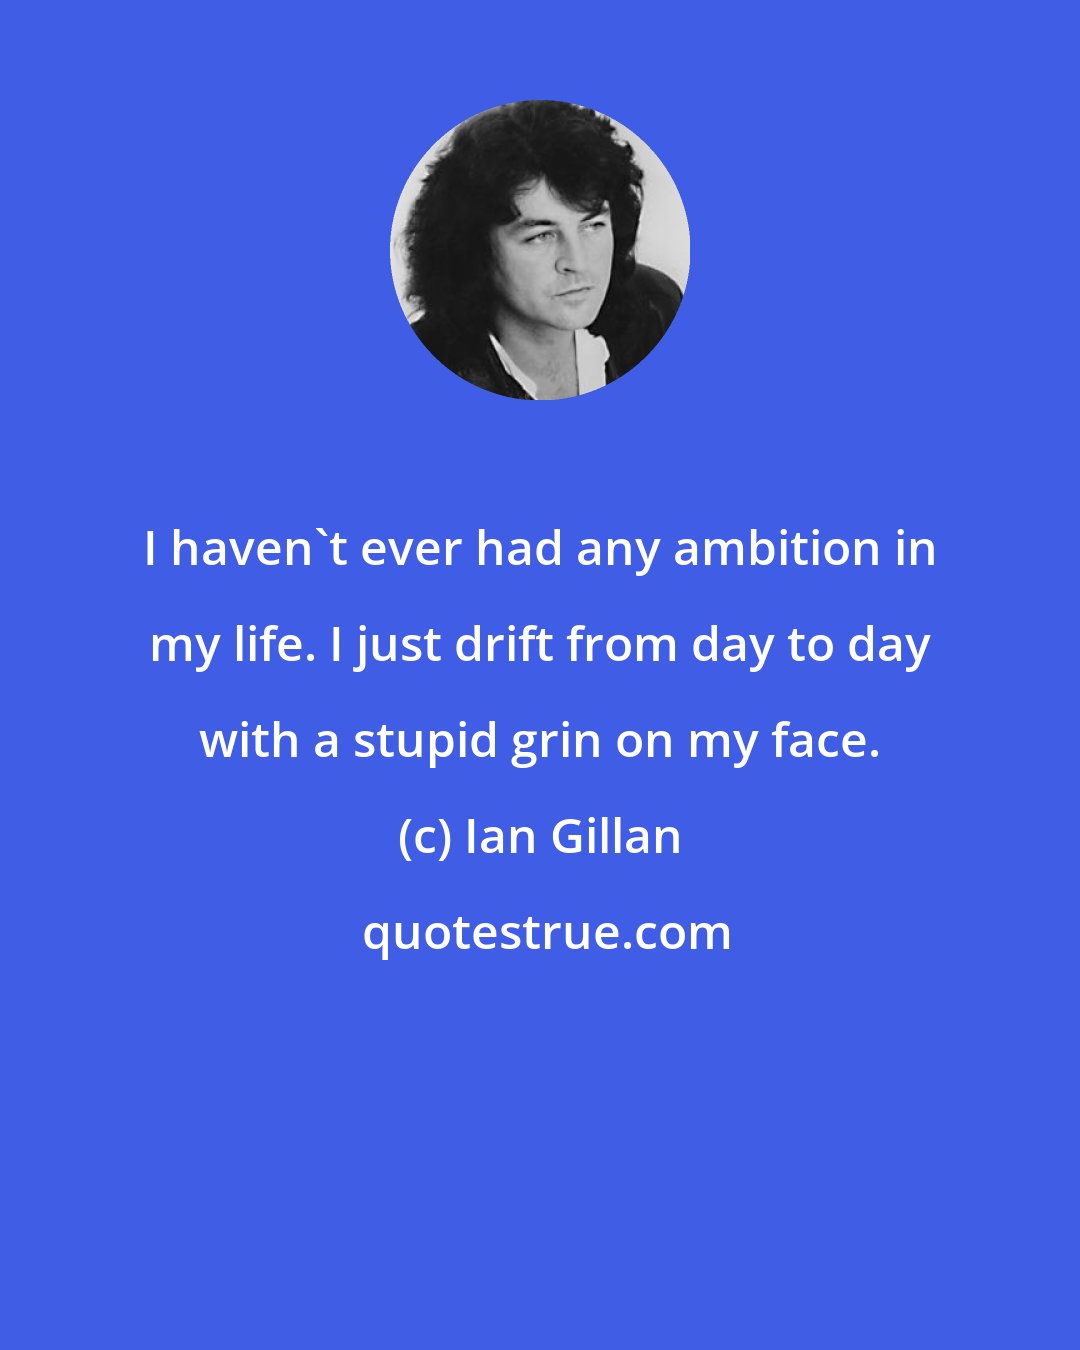 Ian Gillan: I haven't ever had any ambition in my life. I just drift from day to day with a stupid grin on my face.